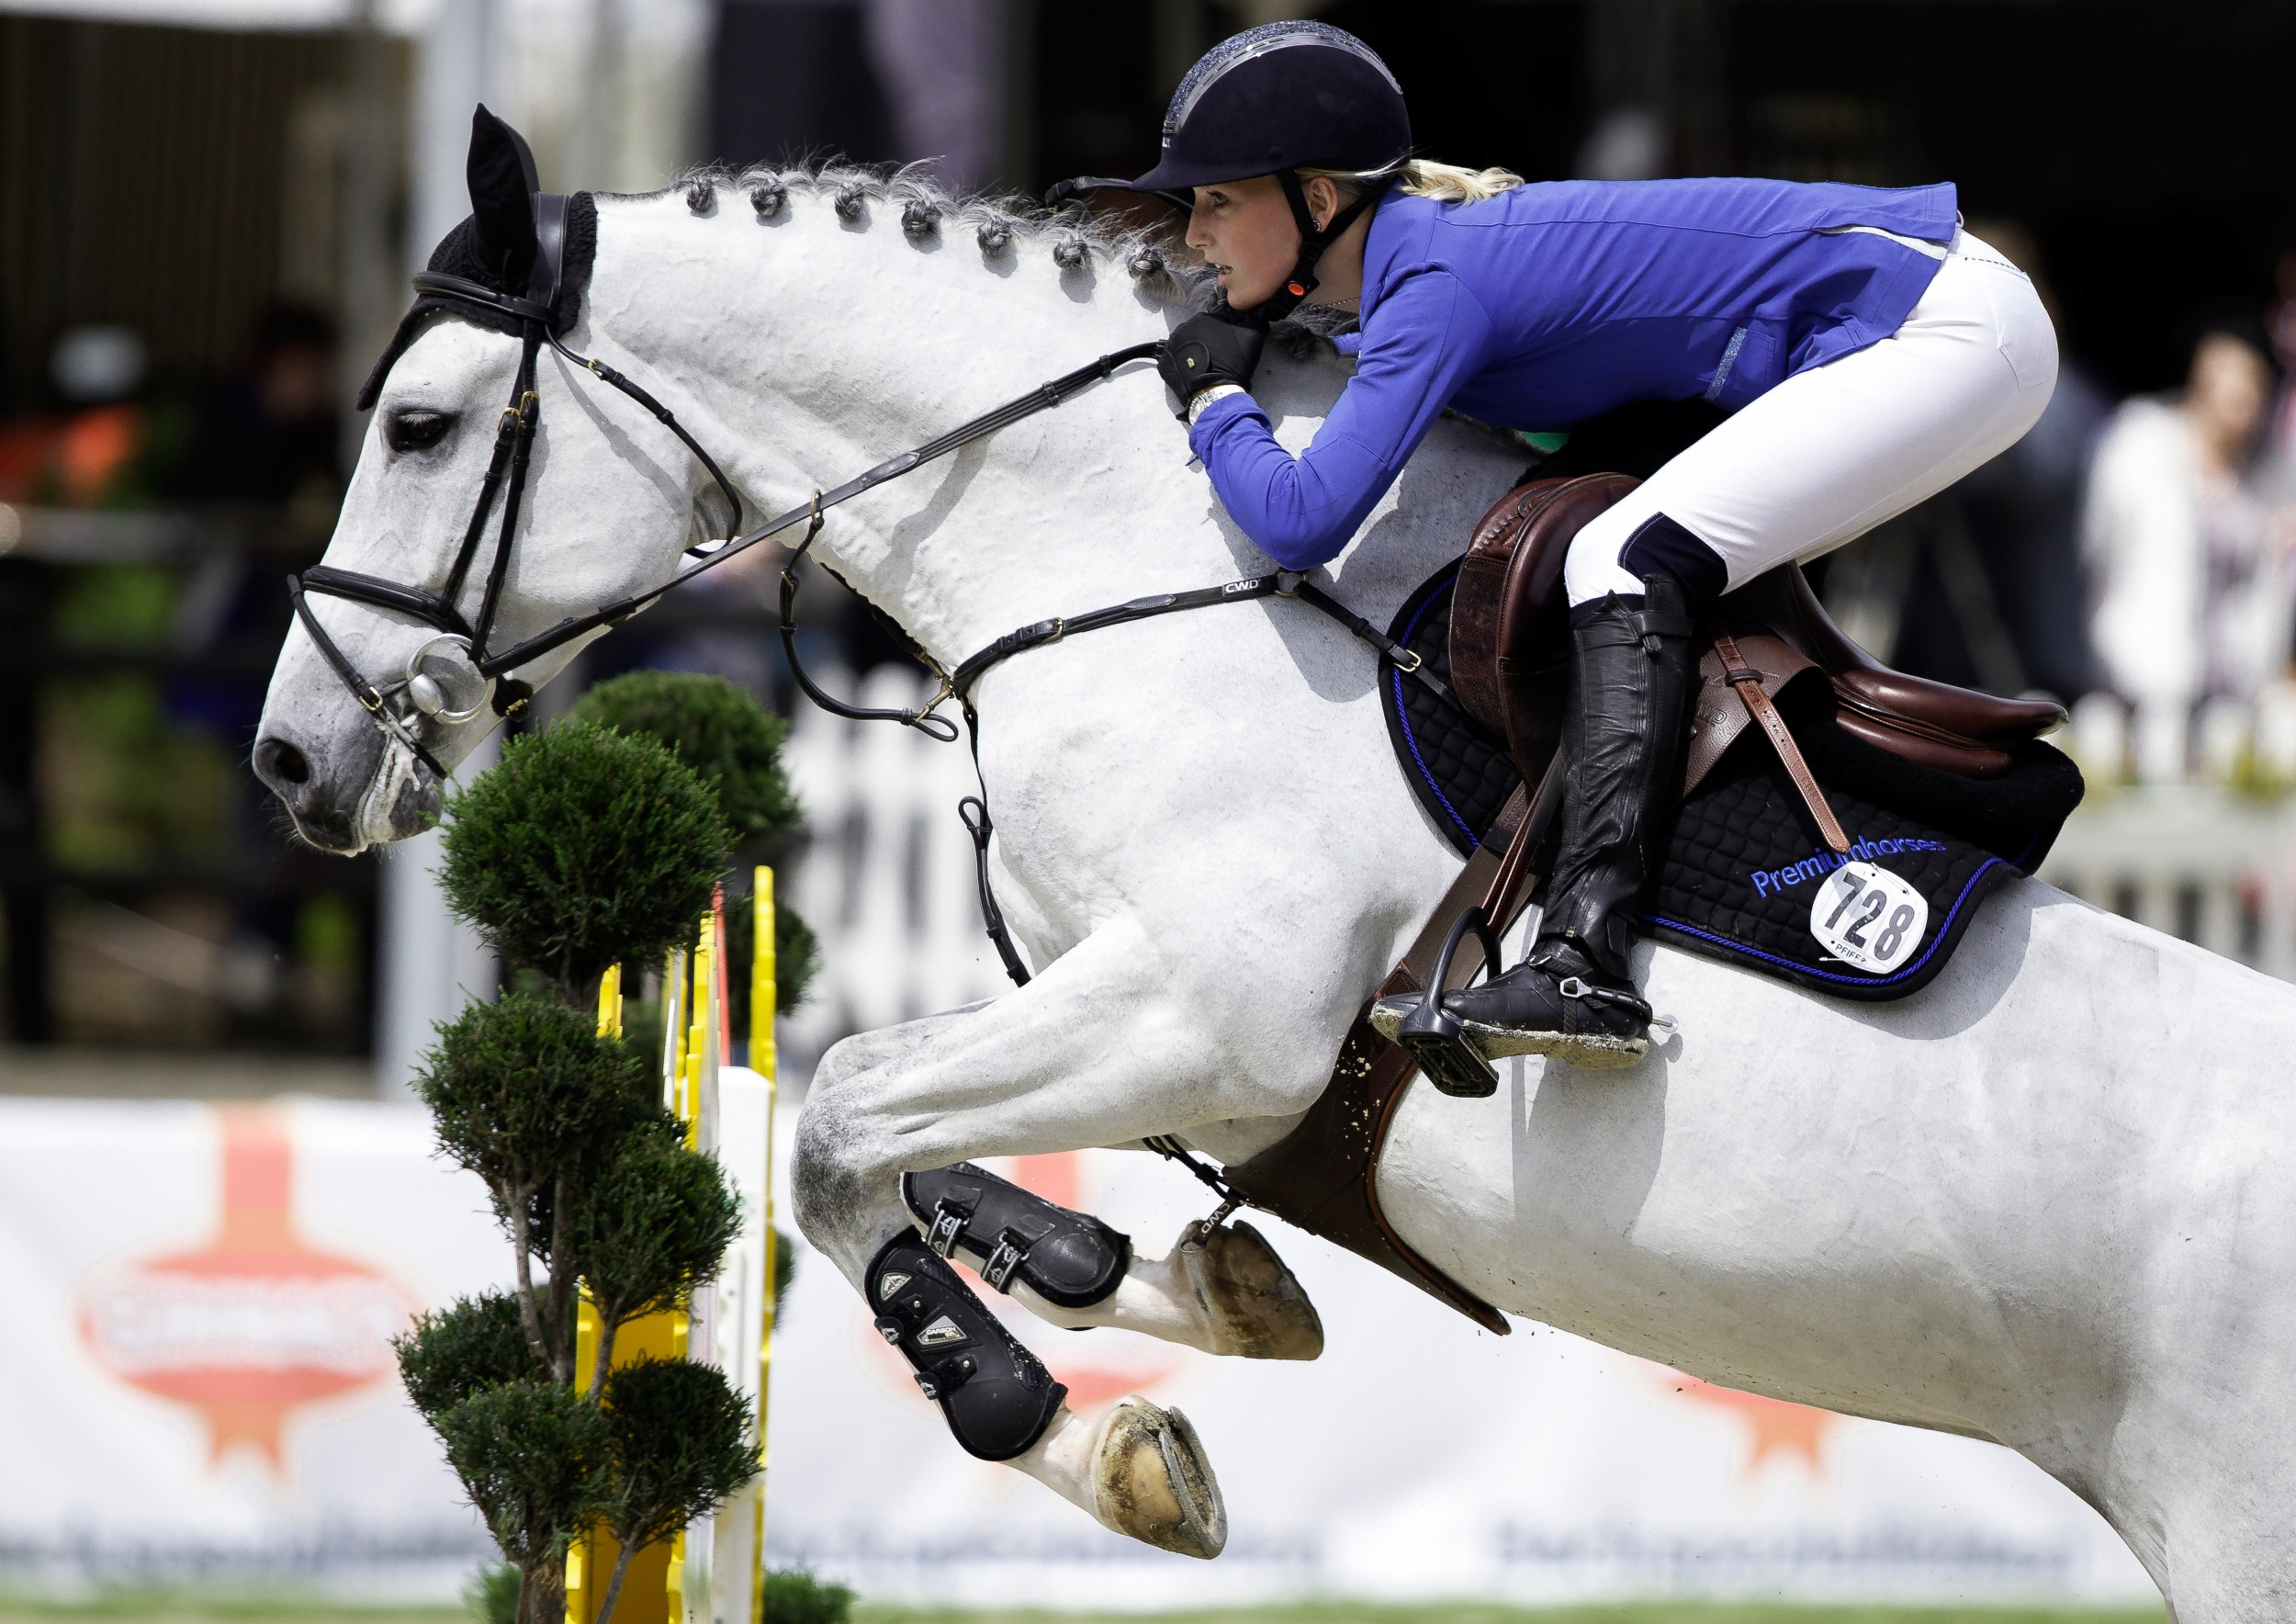 Jumping: Show jumping on a horse, Horsewoman, Leaping, Outdoor sports, Equestrianism. 2500x1770 HD Wallpaper.